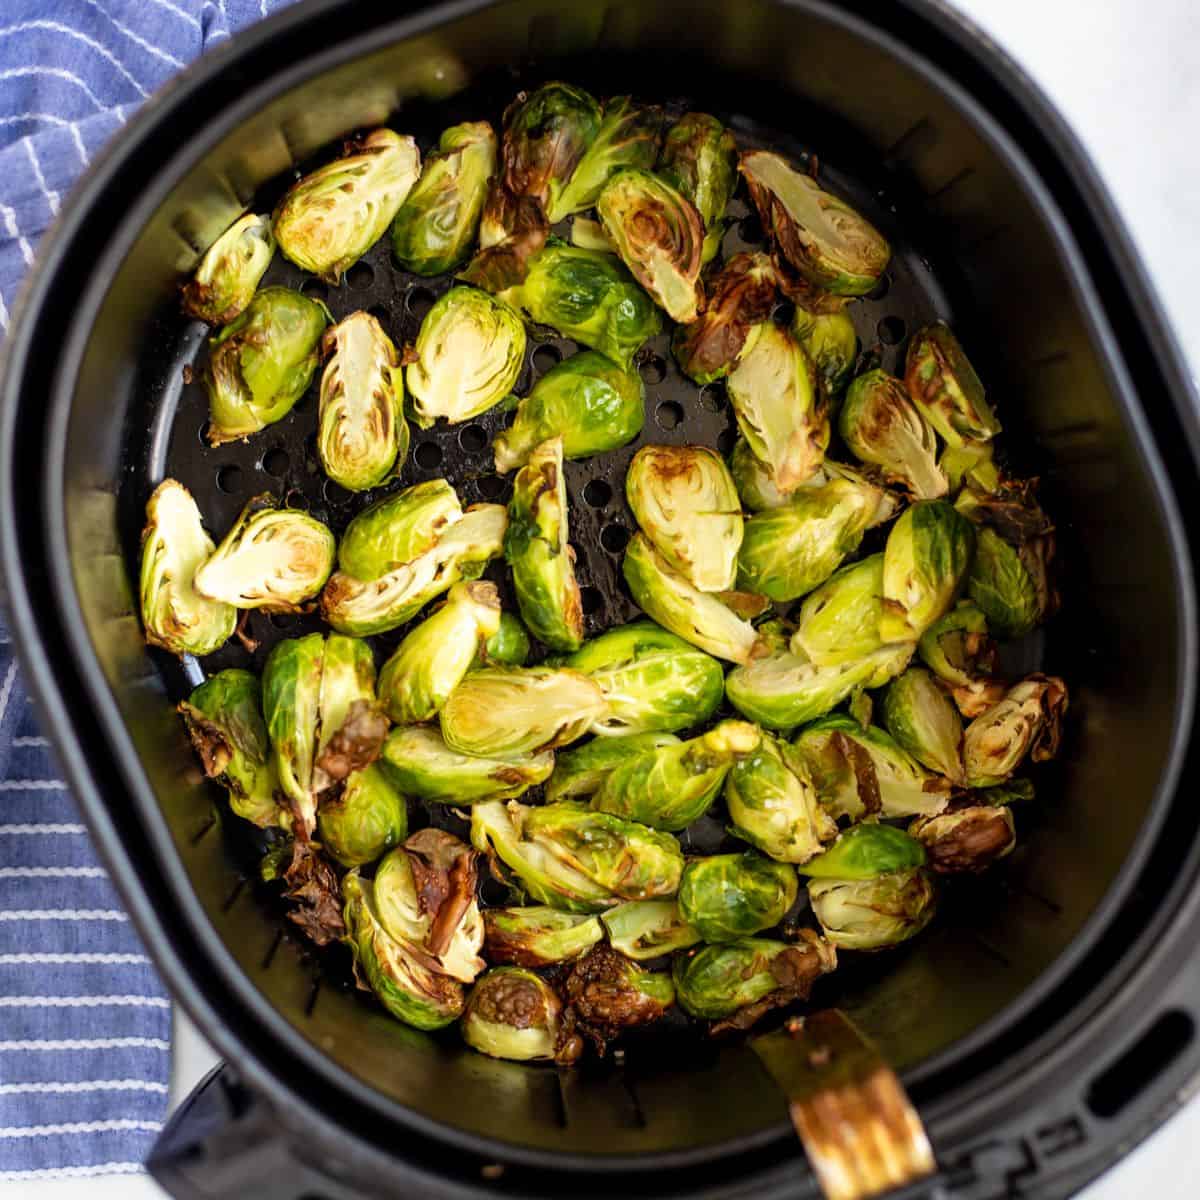 https://amindfullmom.com/wp-content/uploads/2021/10/Air-Fryer-Brussel-Sprouts.jpg